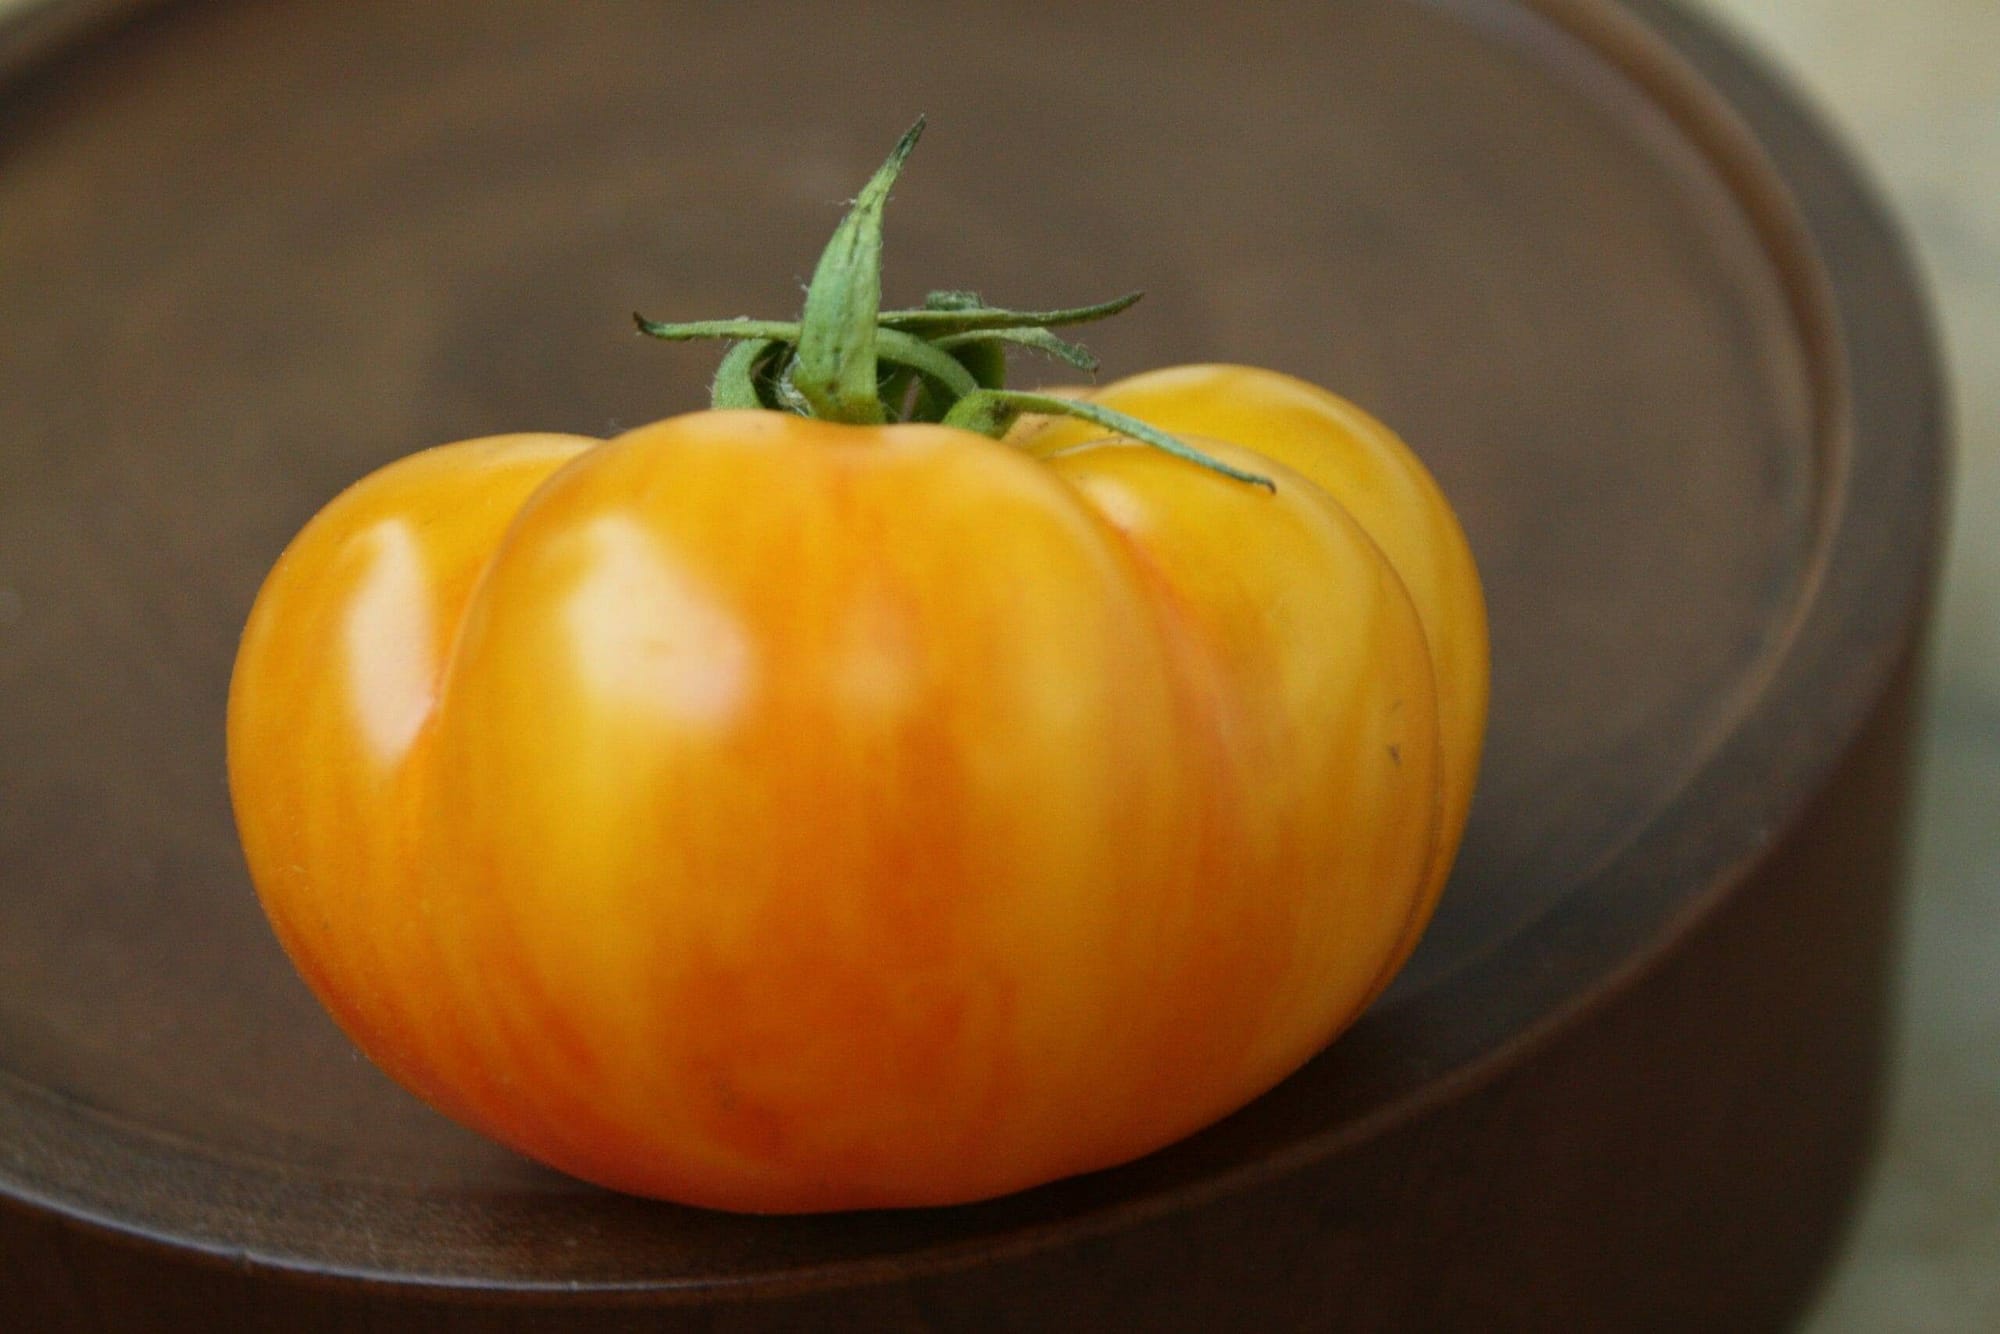 ‘Rumi Banjan’ is small, flattened, and ribbed like a little pumpkin. 